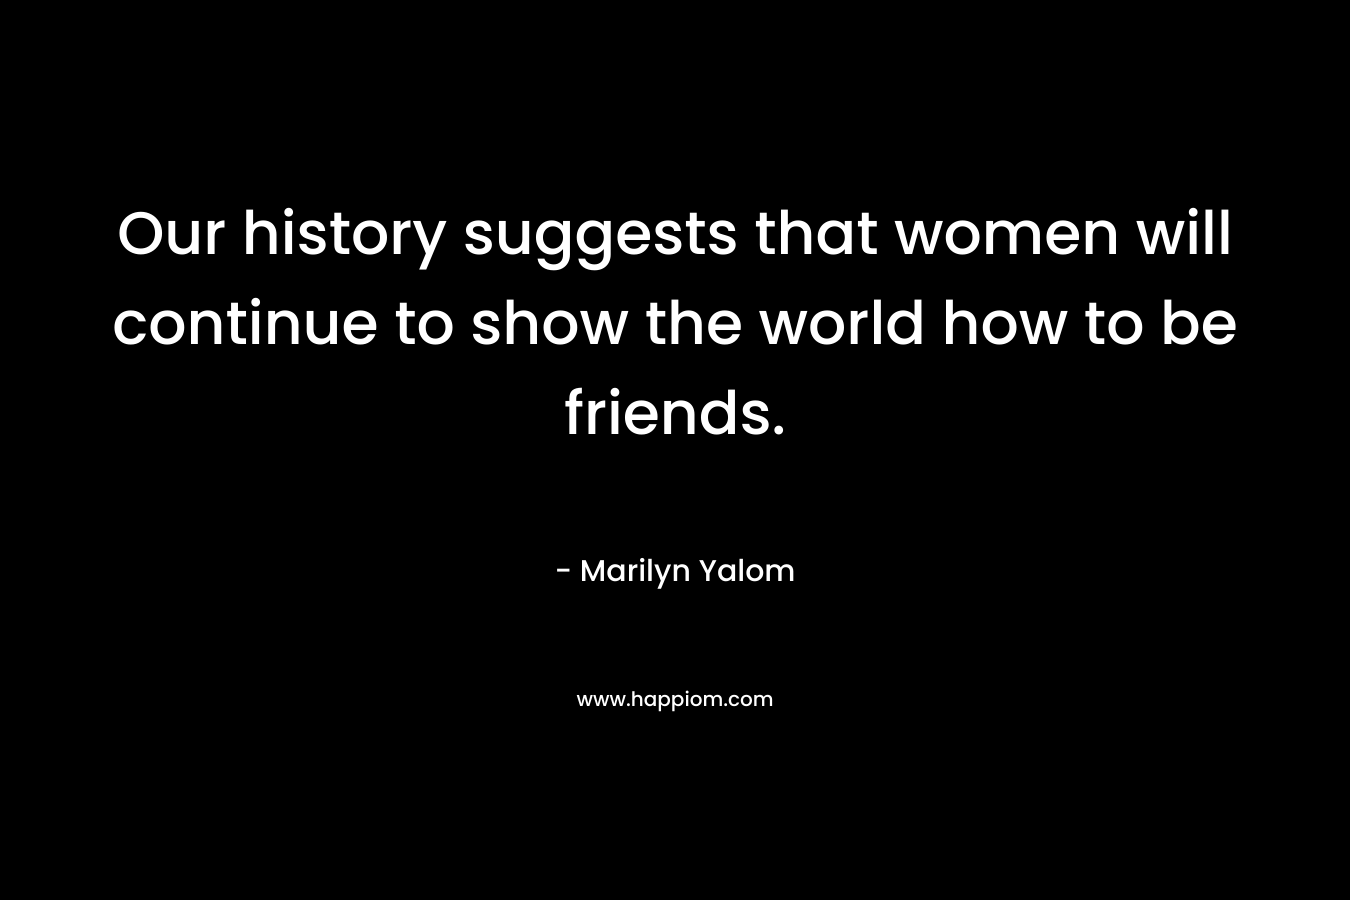 Our history suggests that women will continue to show the world how to be friends.